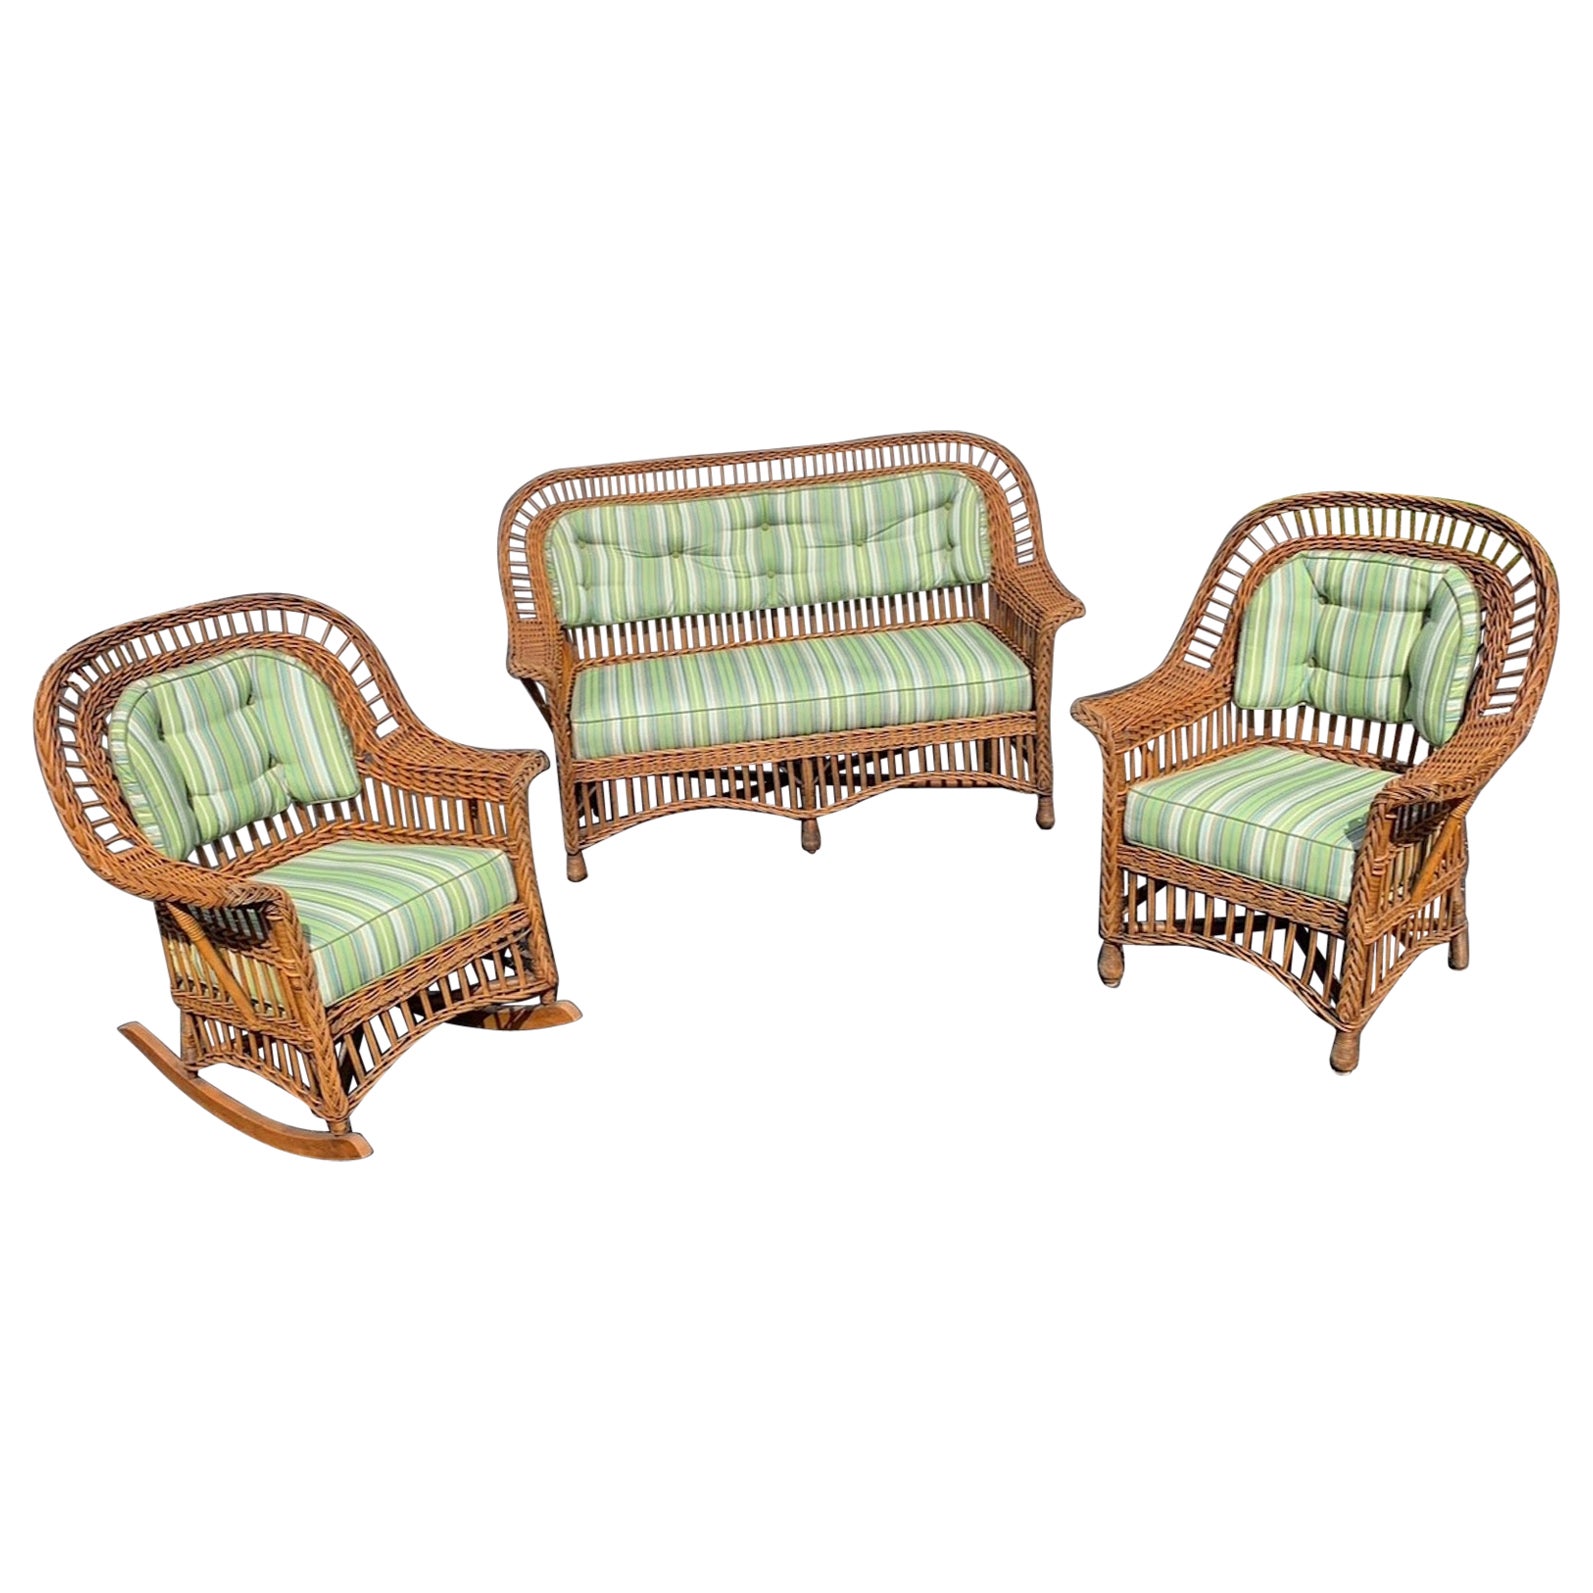 A Three Piece Matching Suite of Antique Bar Harbor Style Wicker Furniture 